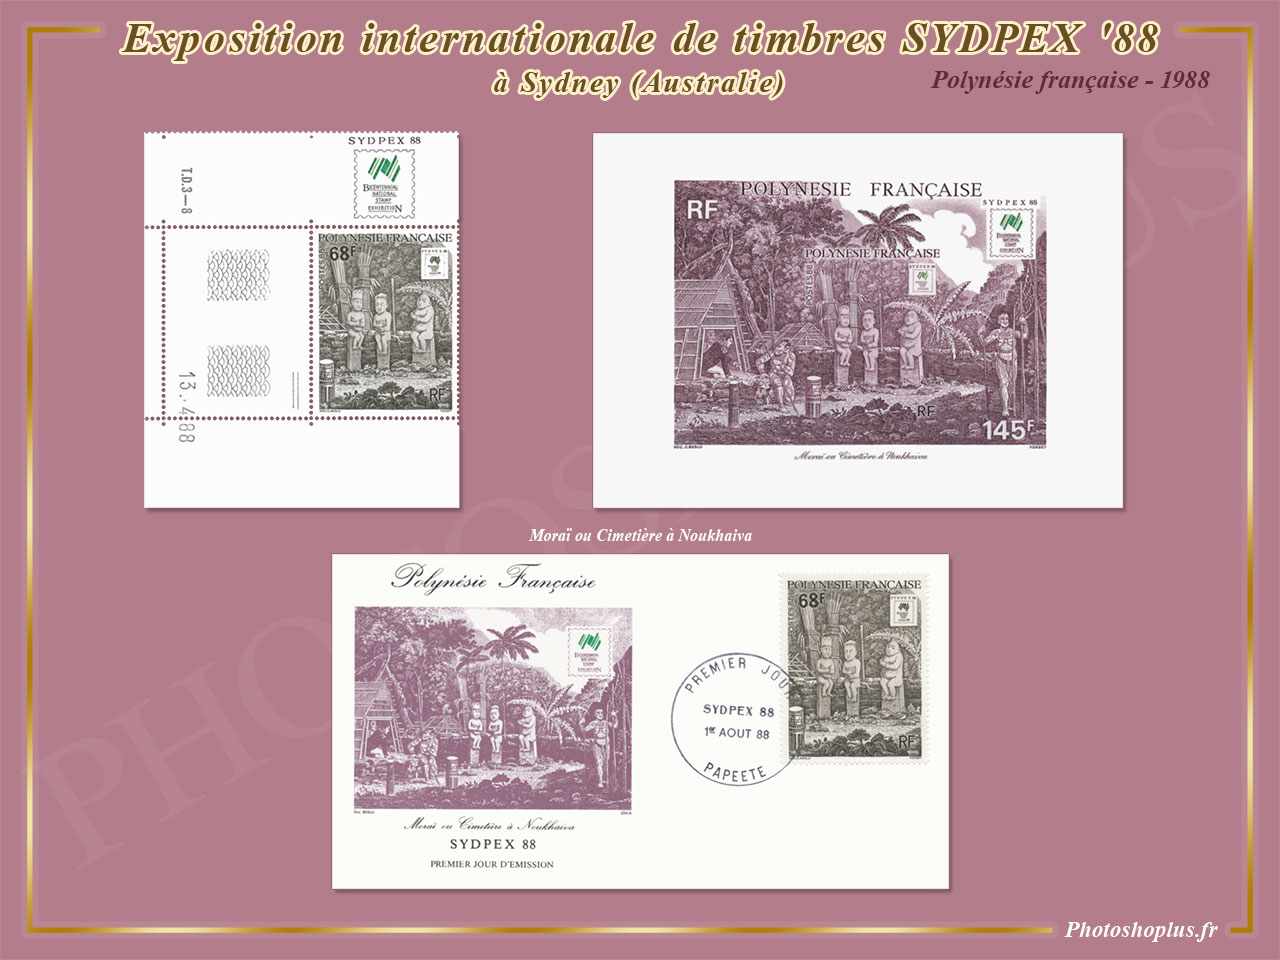 Exposition internationale de timbres SYDPEX '88